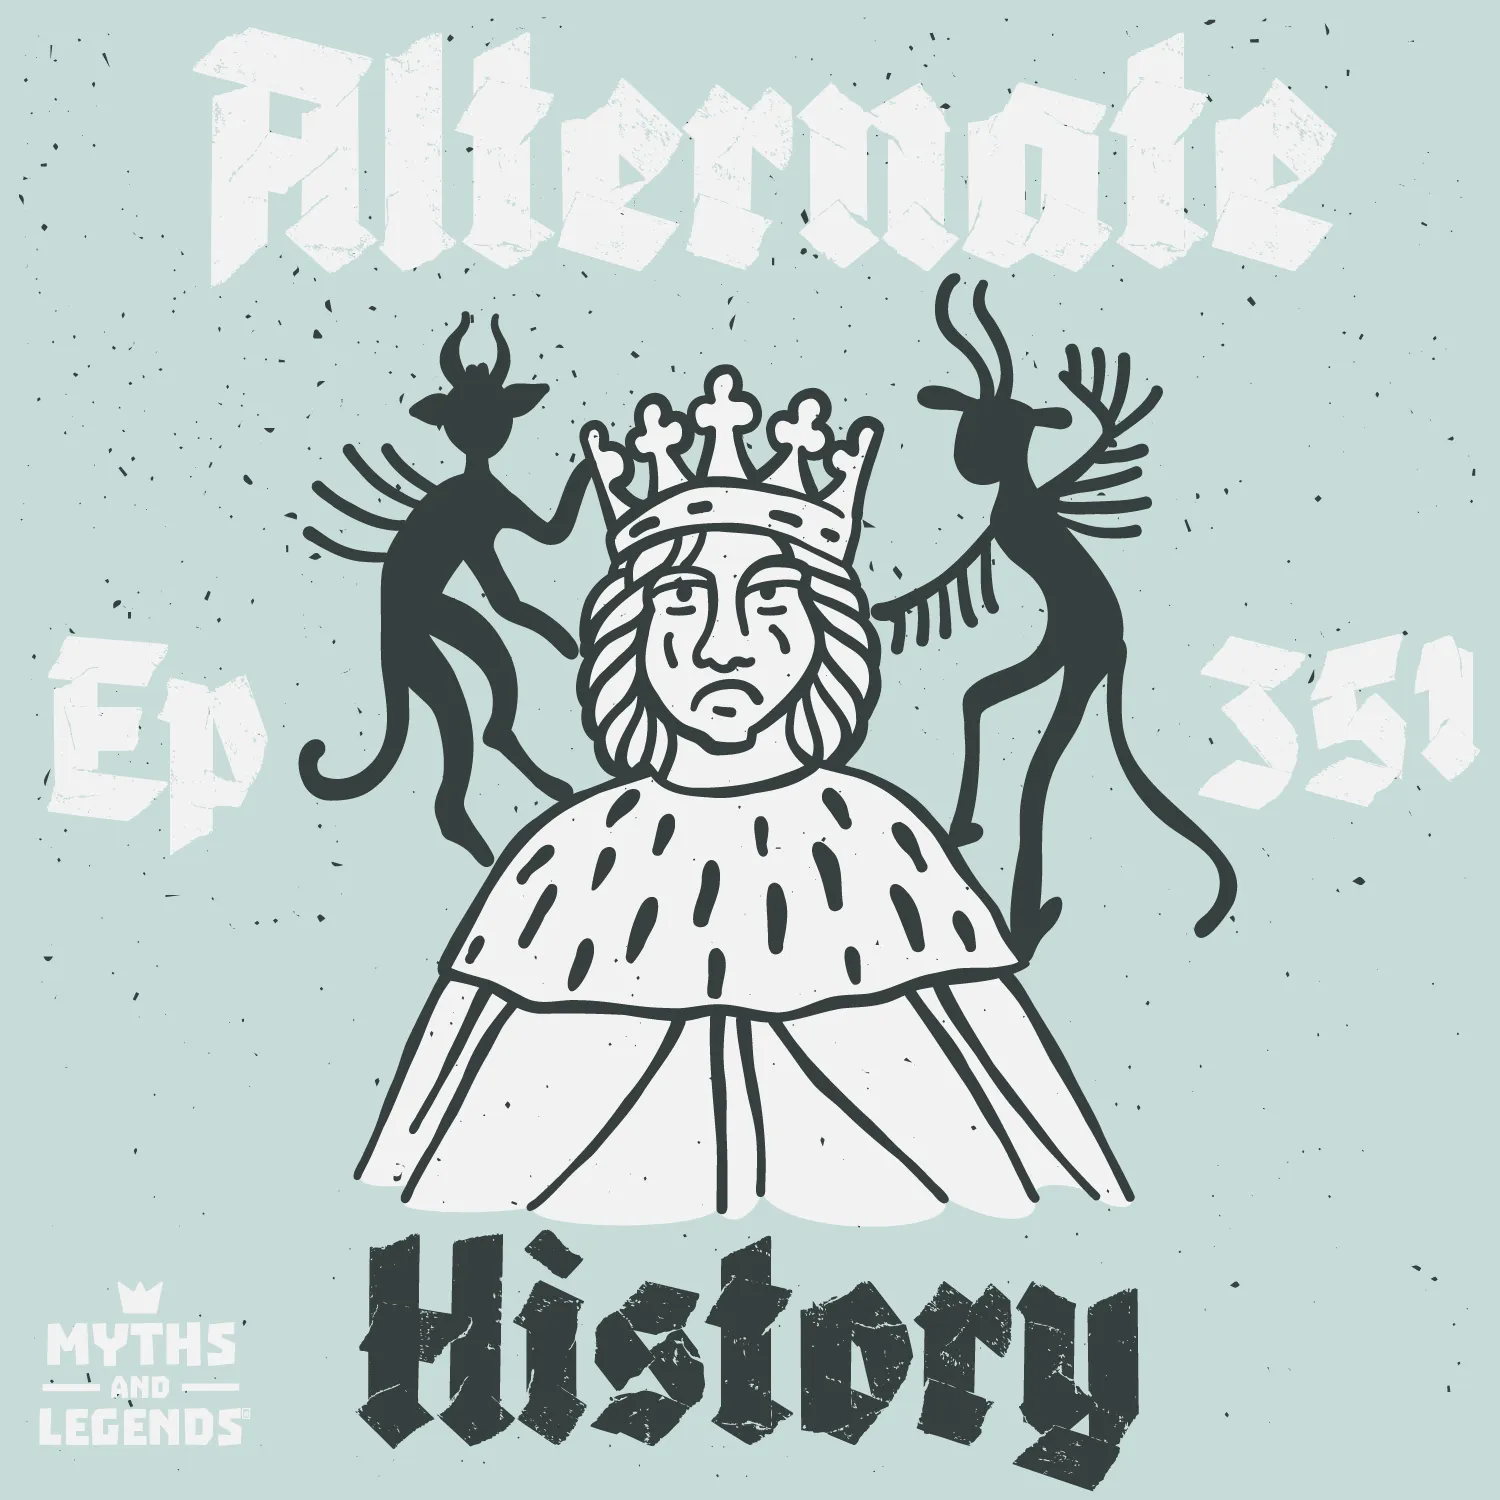 The central illustration is a crowned figure resembling a king flanked by two imp-like silhouetted creatures. Above is the text "Alternate" and below the figure is the word "History". The style is illustrative with a textured background, conveying a historical or mythical theme.